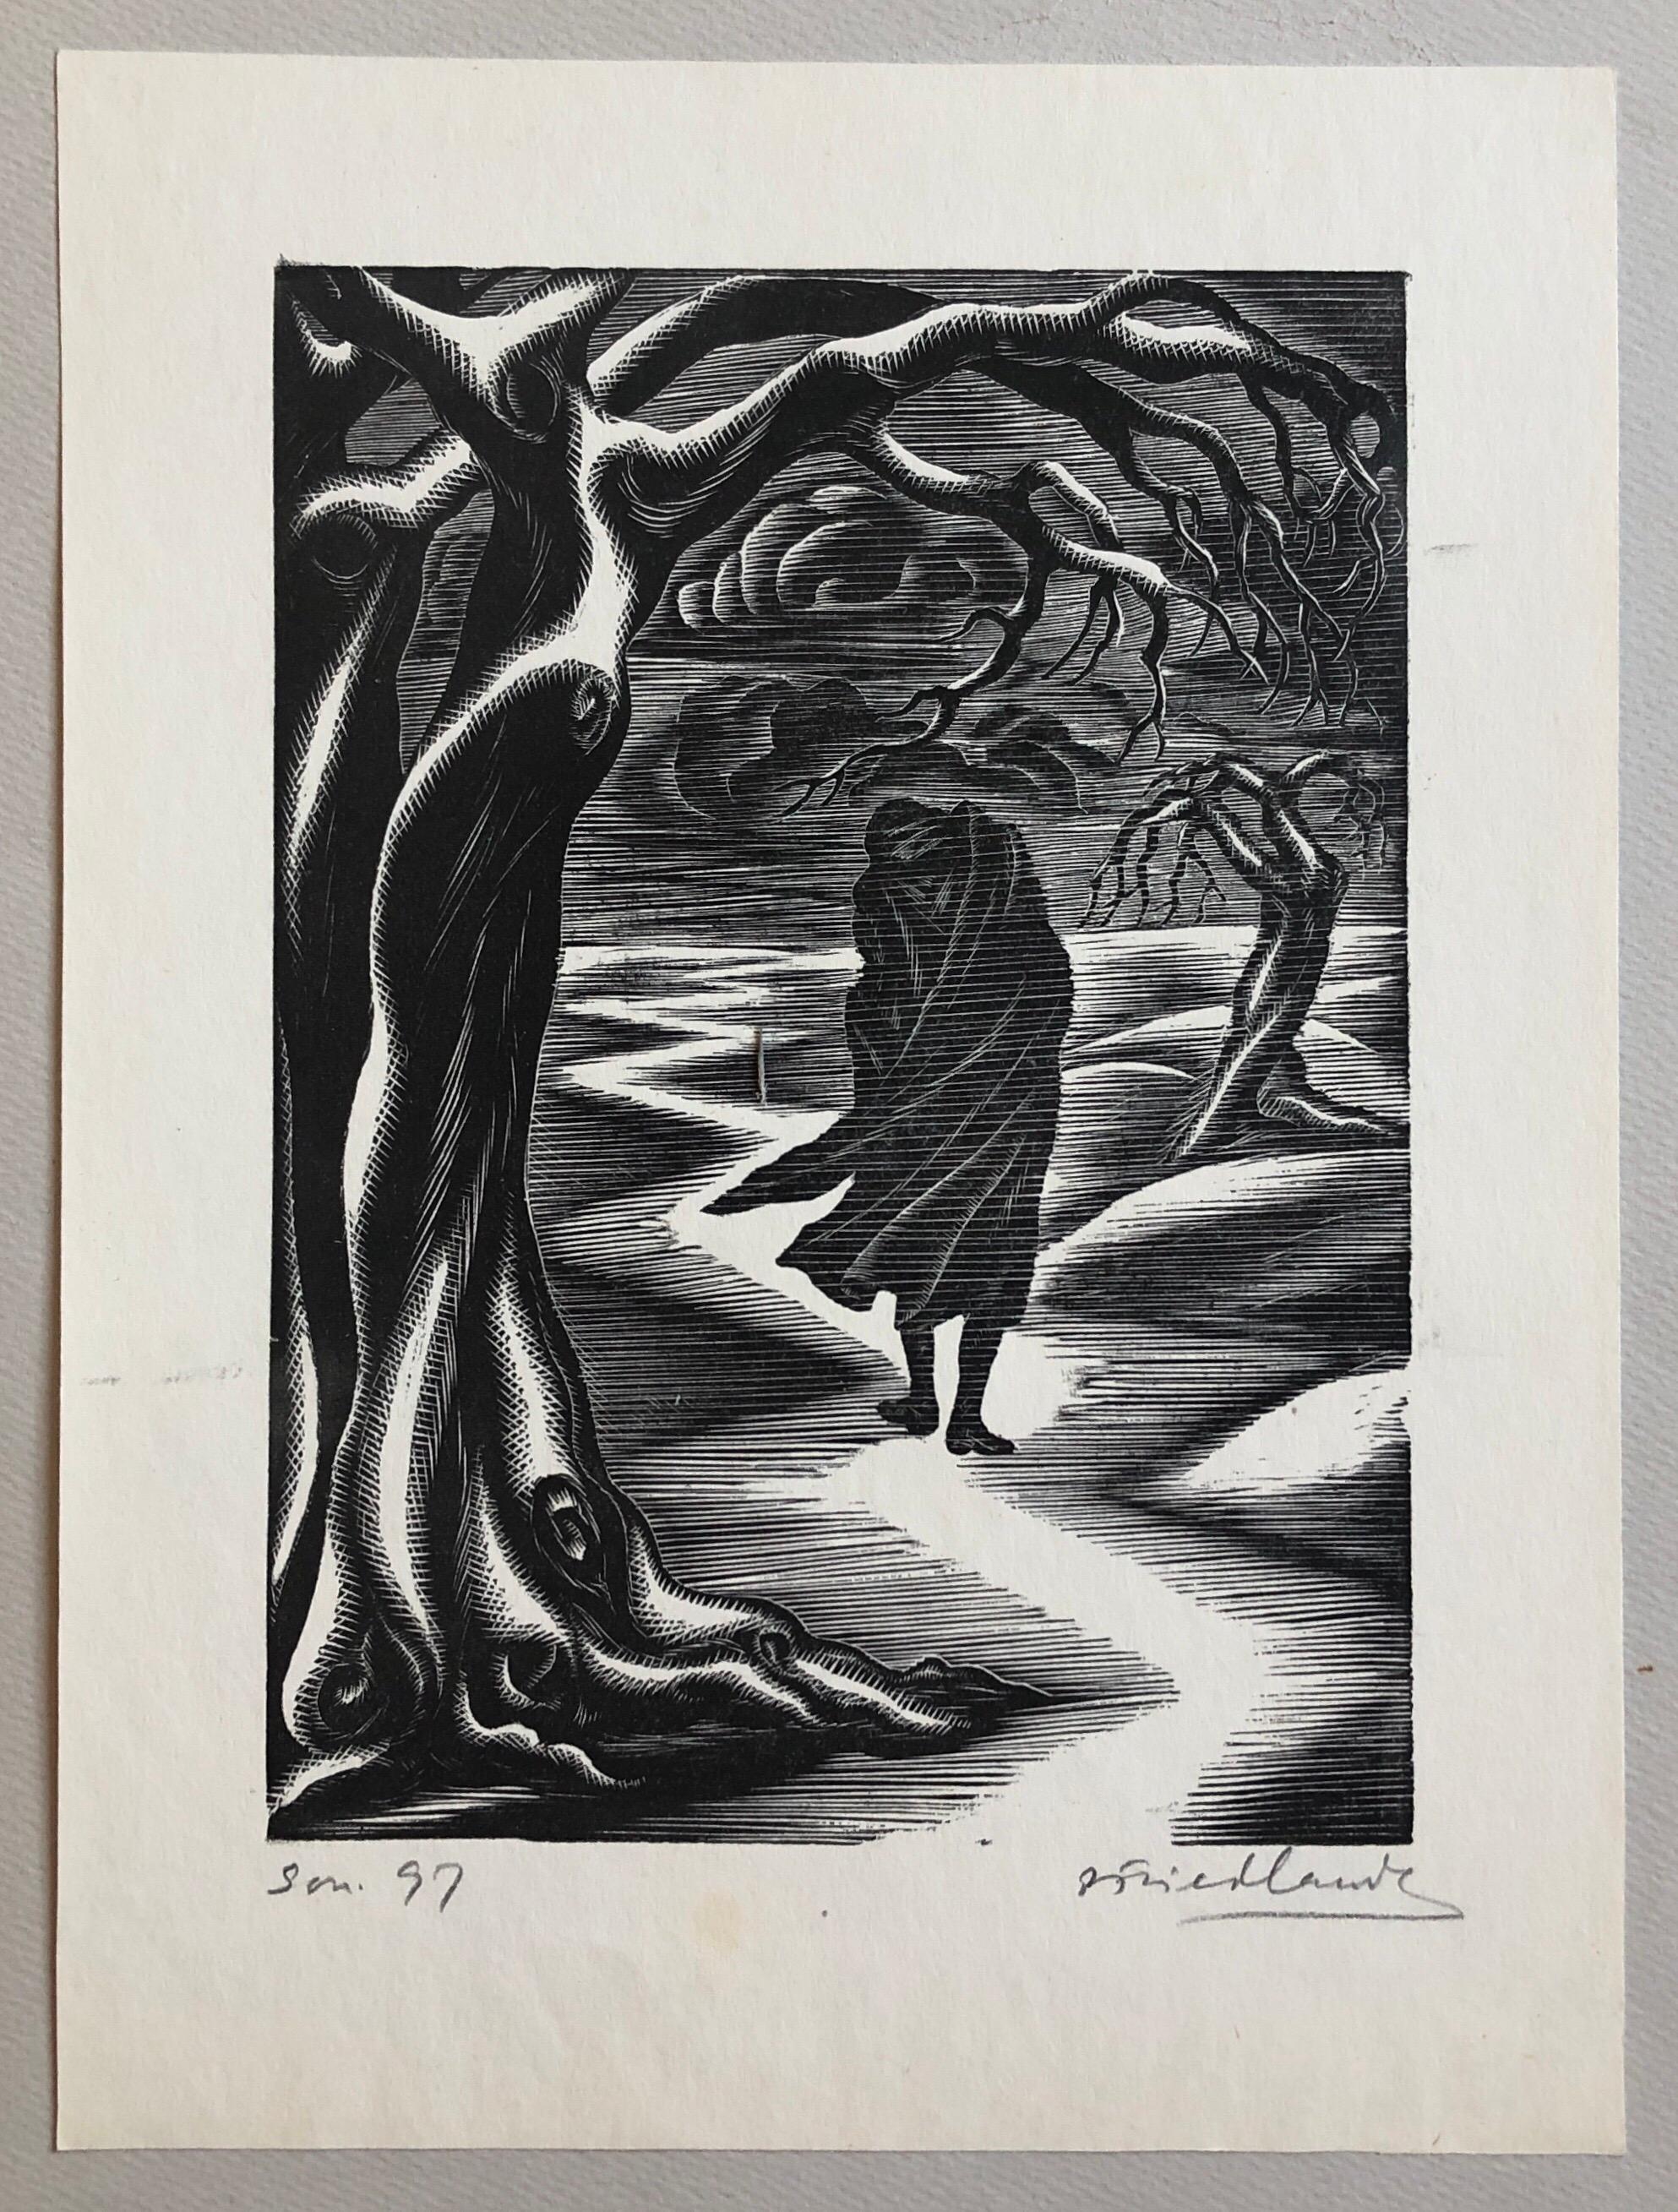 Artist: Friedlander, Isaac American (1890-1968) 13.25x10 back sheet,  actual print 10x7.25

 Isac Friedlander  Latvian-born American Printmaker, 1890-1968 
was born in Mitau, Latvia. He studied art at the Academy of Rome. He was befriended by the